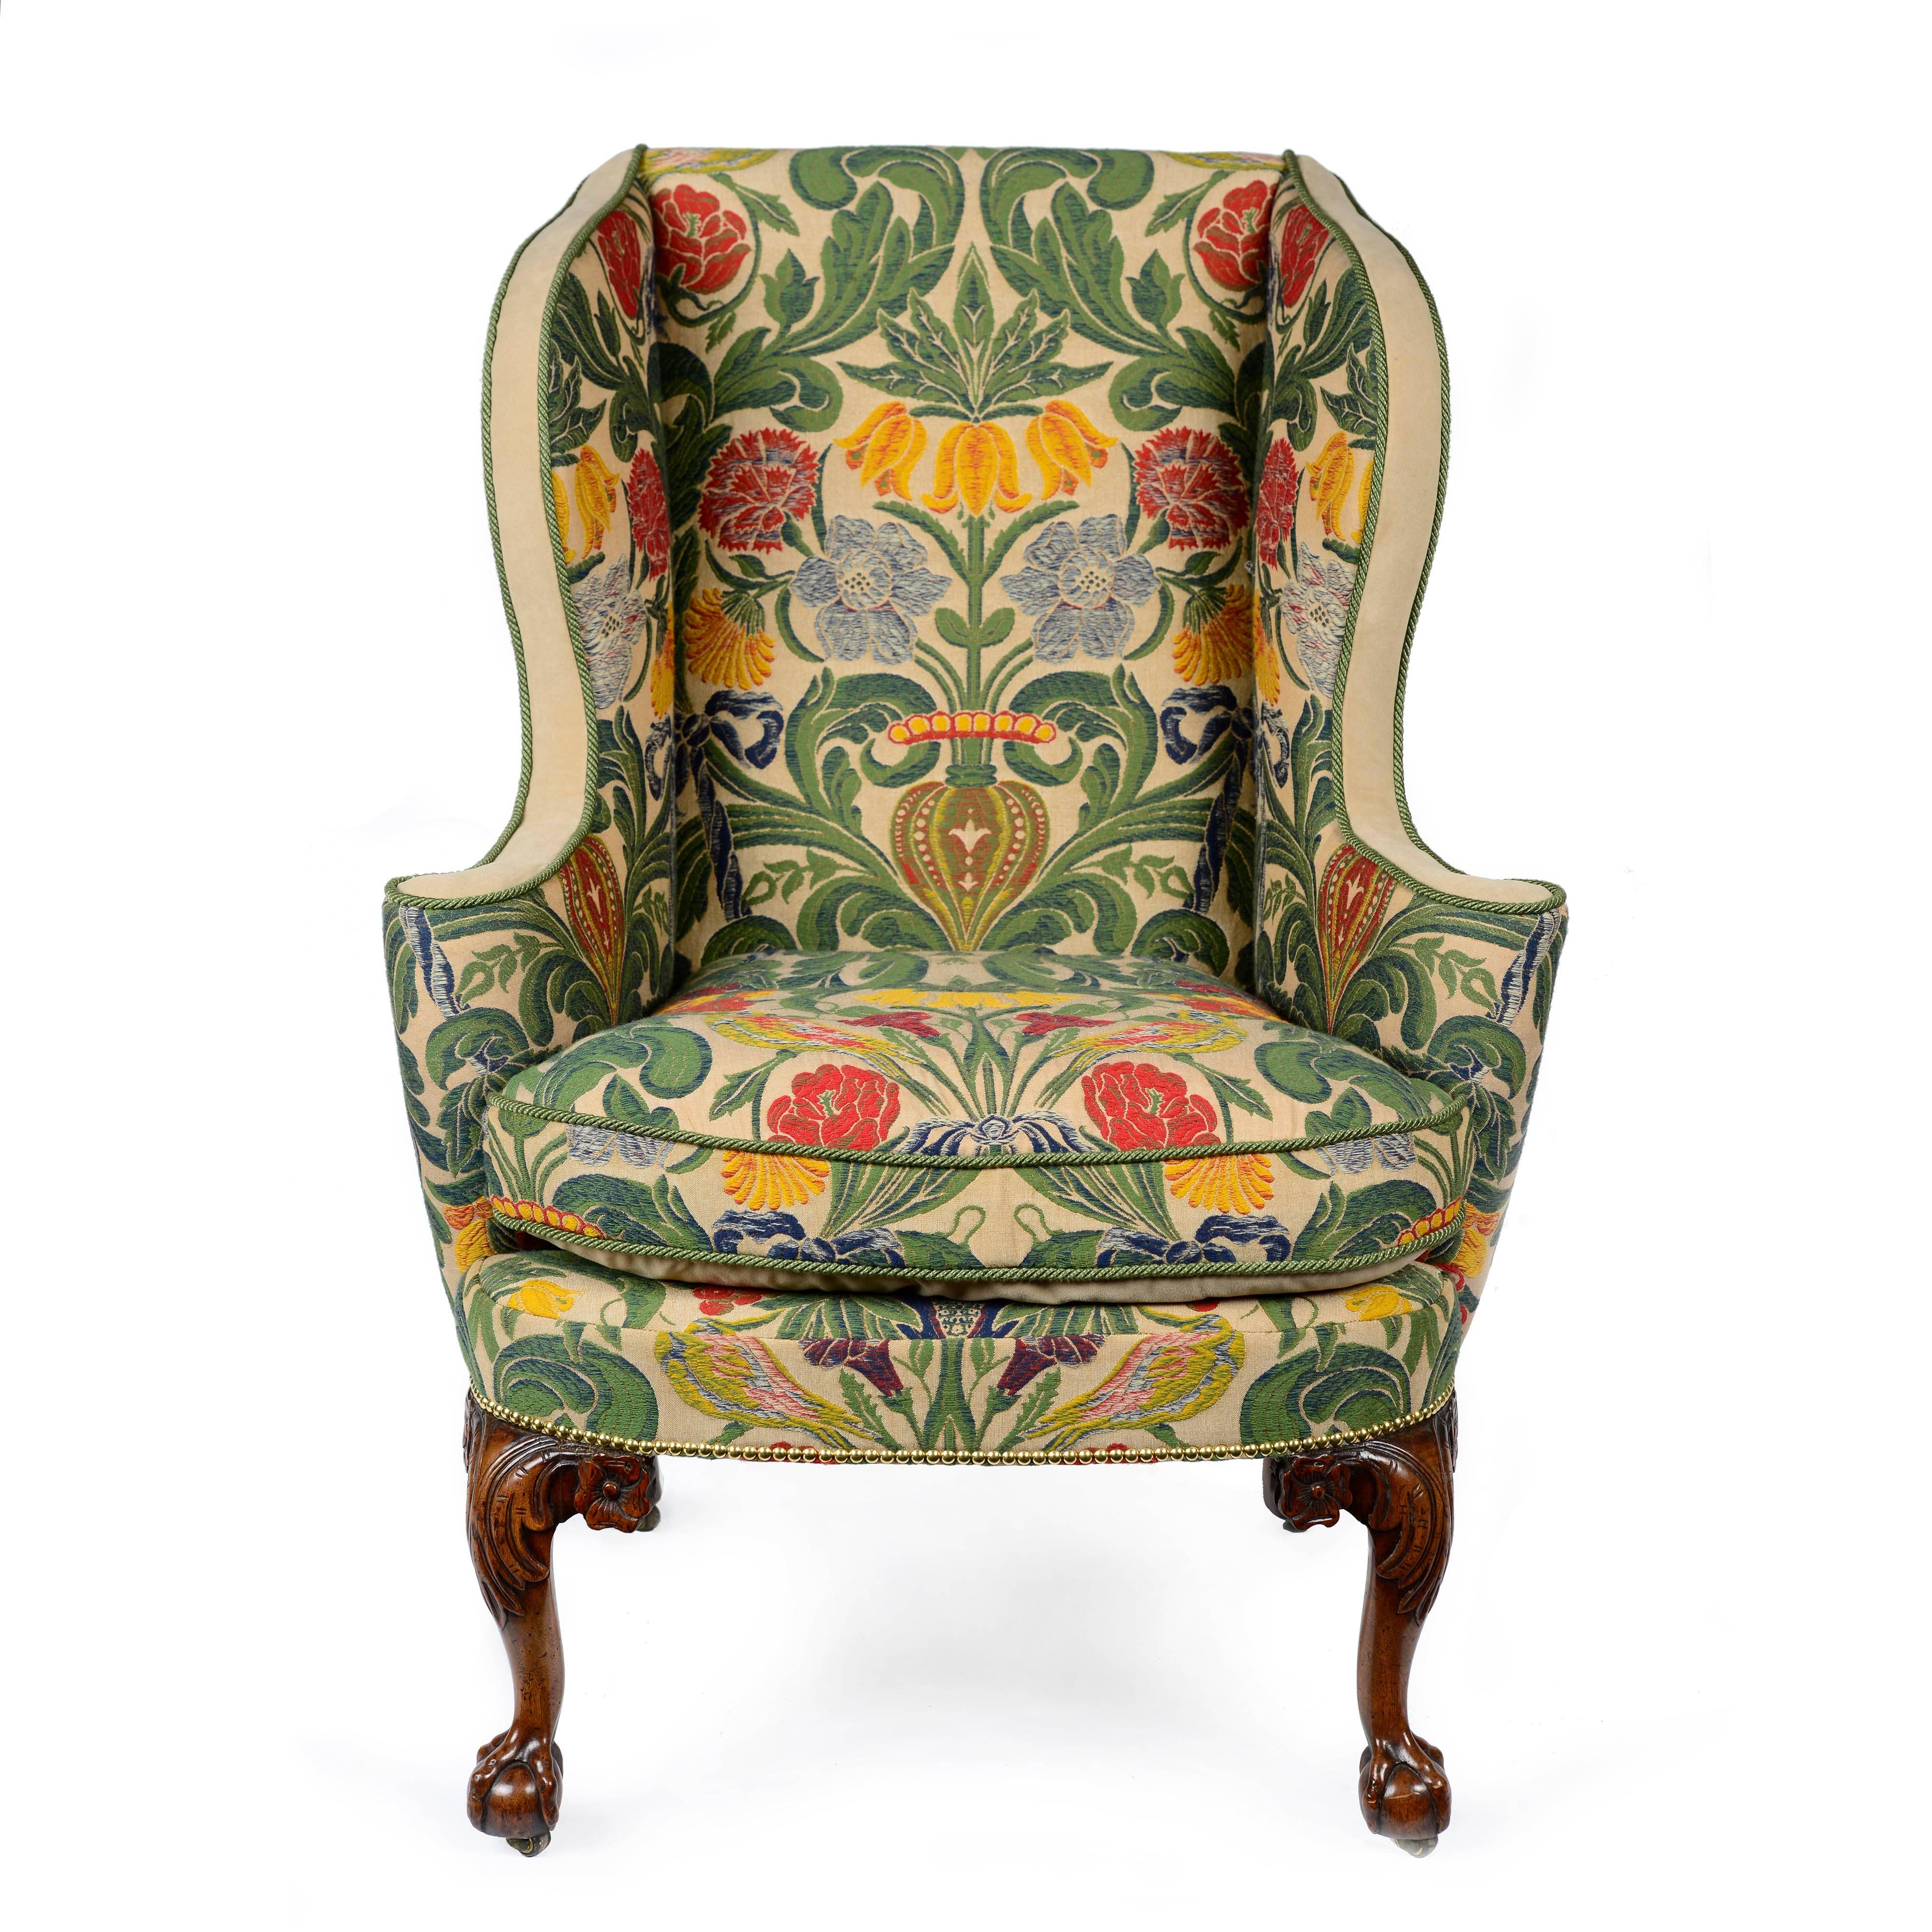 A superb English George II walnut wing back armchair of excellent shape and proportions. The back with straight top flanked by out swept side wings, scrolling outwards to form armrests which terminate in an elegant tightly scrolled column. The seat